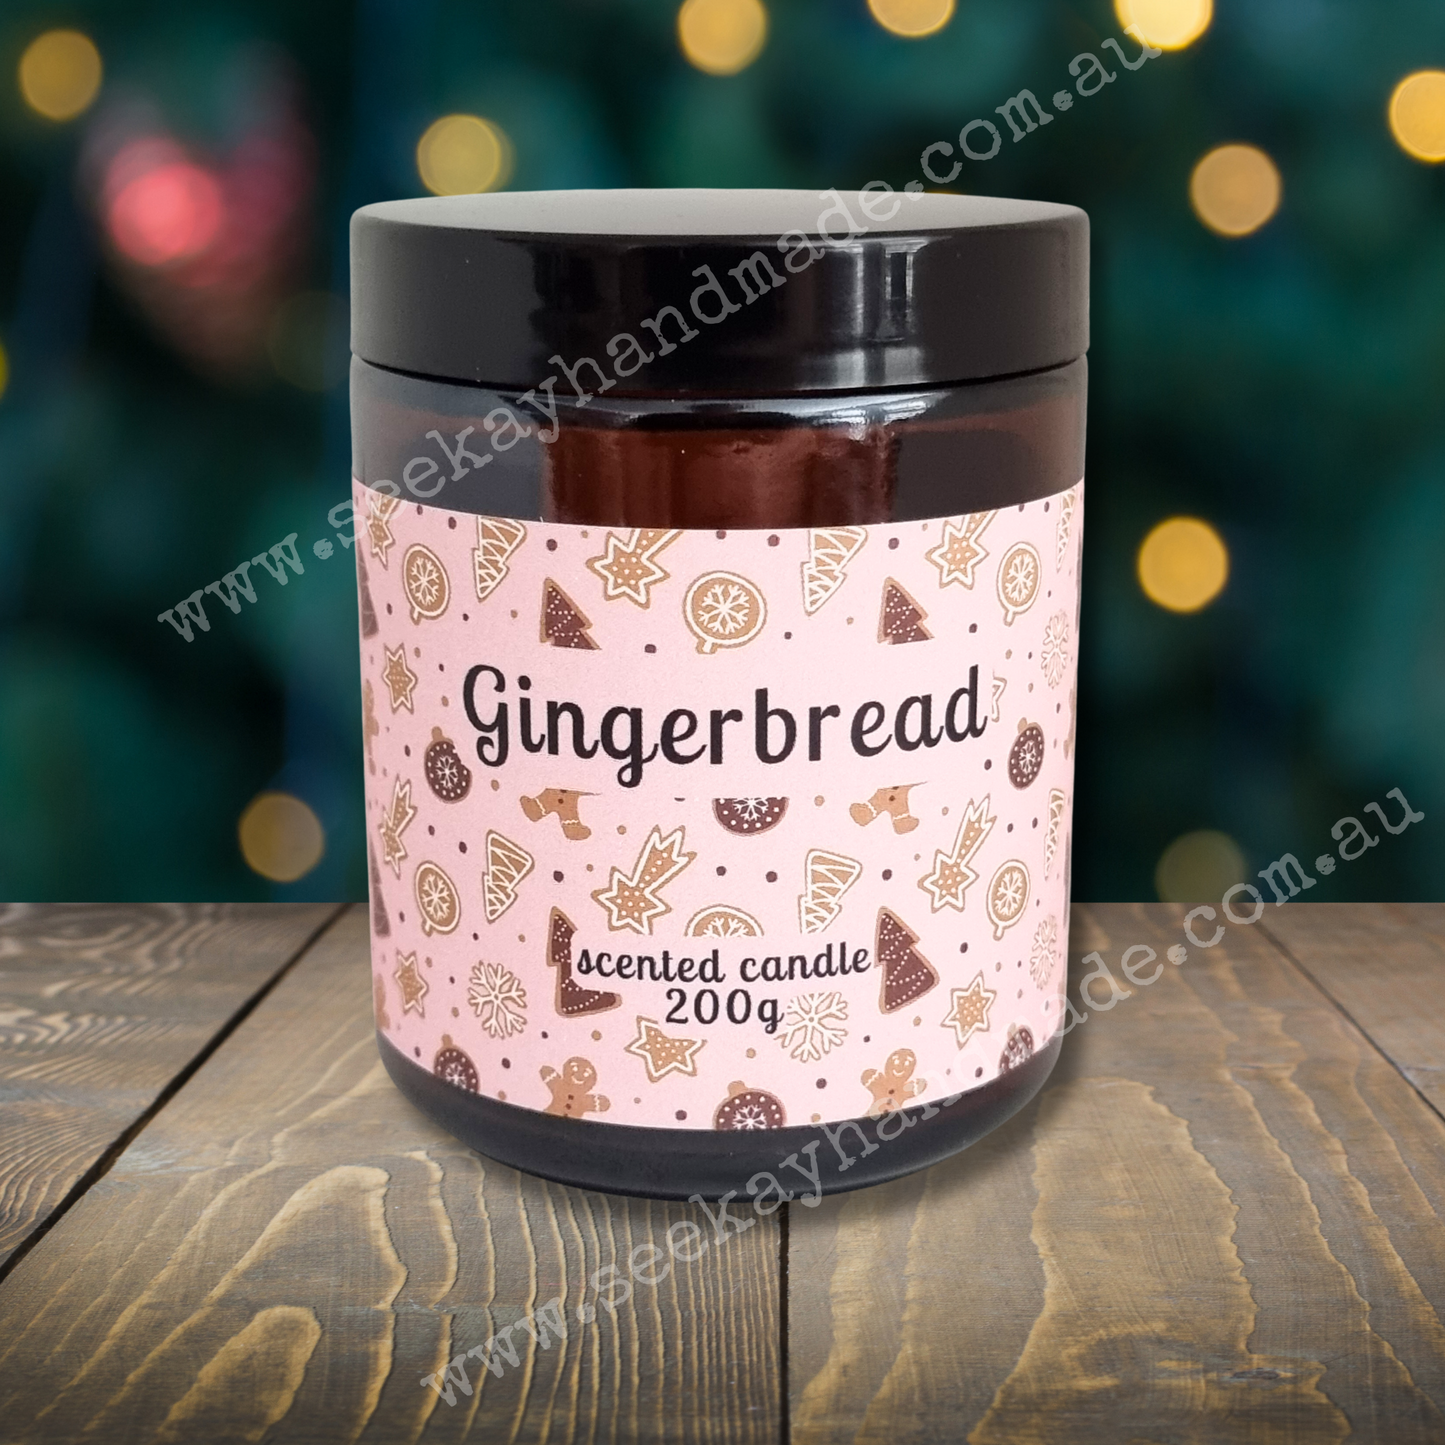 Wood Wick Soy Candle, 200g Gingerbread, Candy Cane, Sugar Cookie soy wax Christmas candle